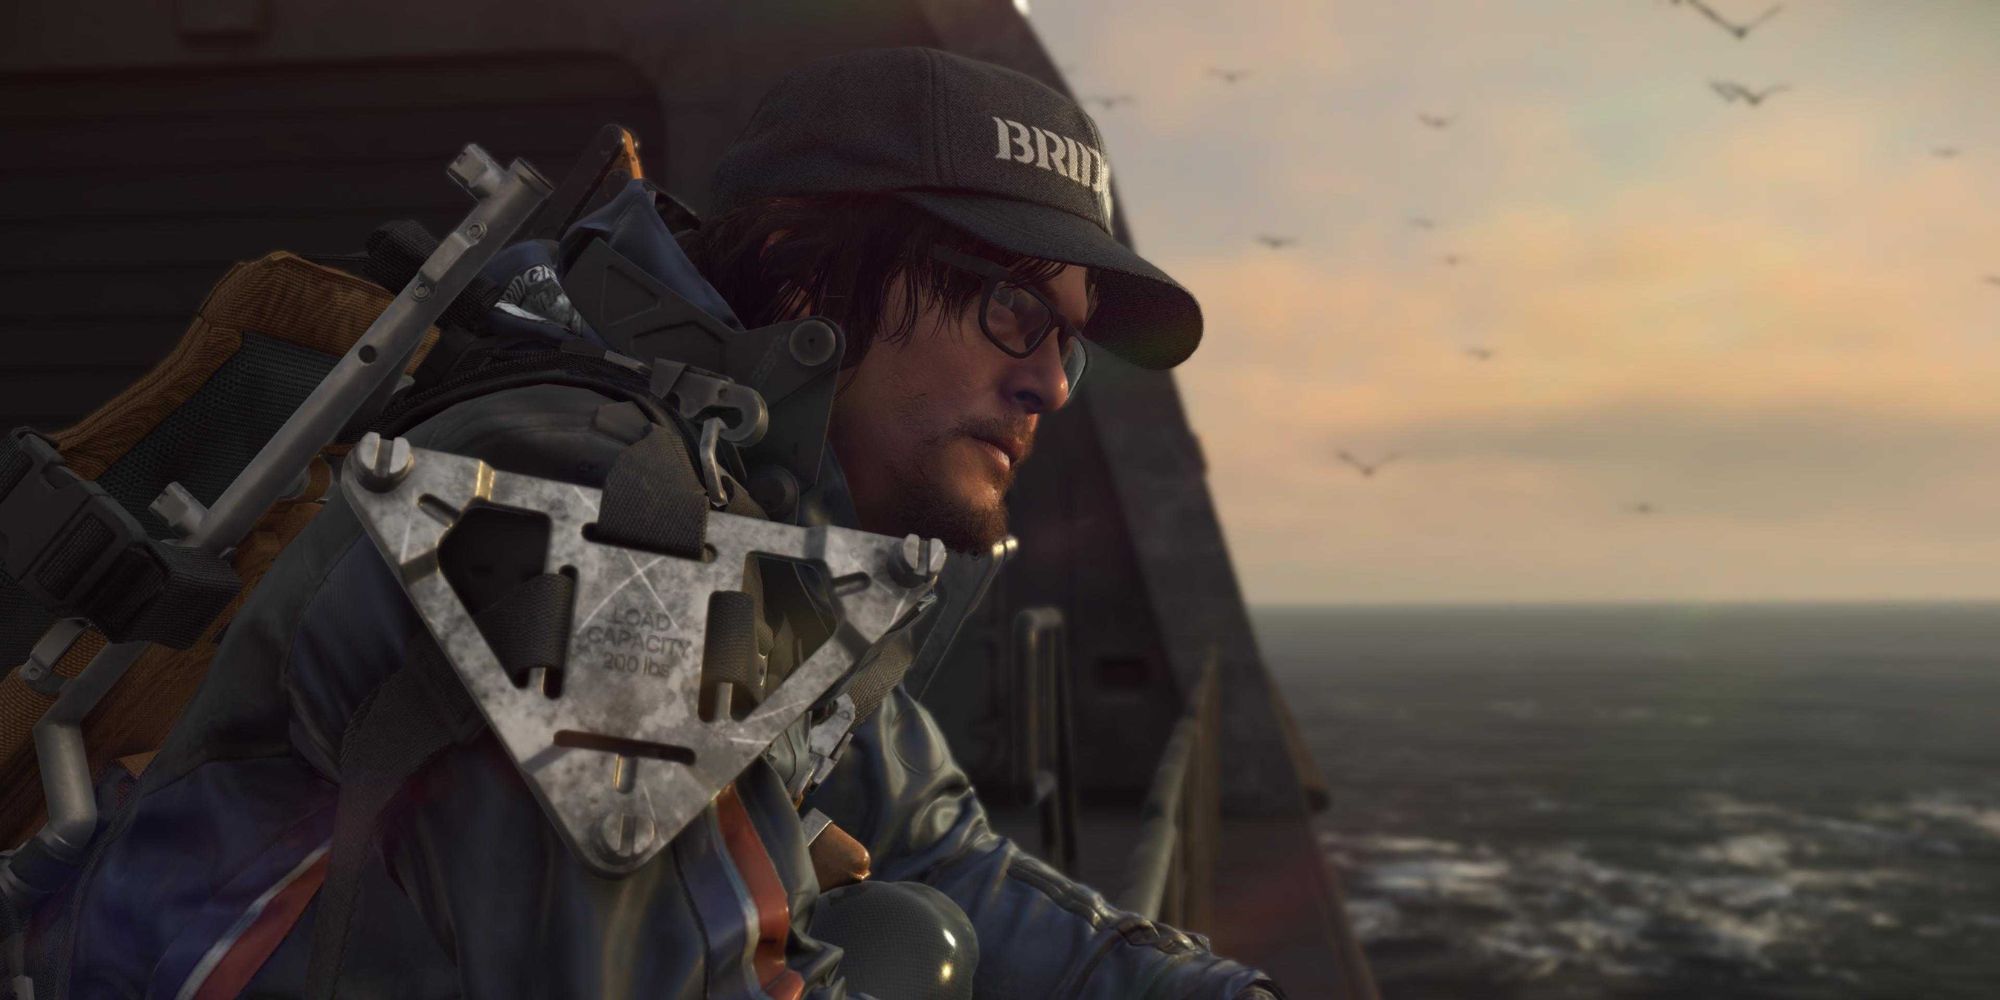 Sam looking out at the ocean in Death Stranding.